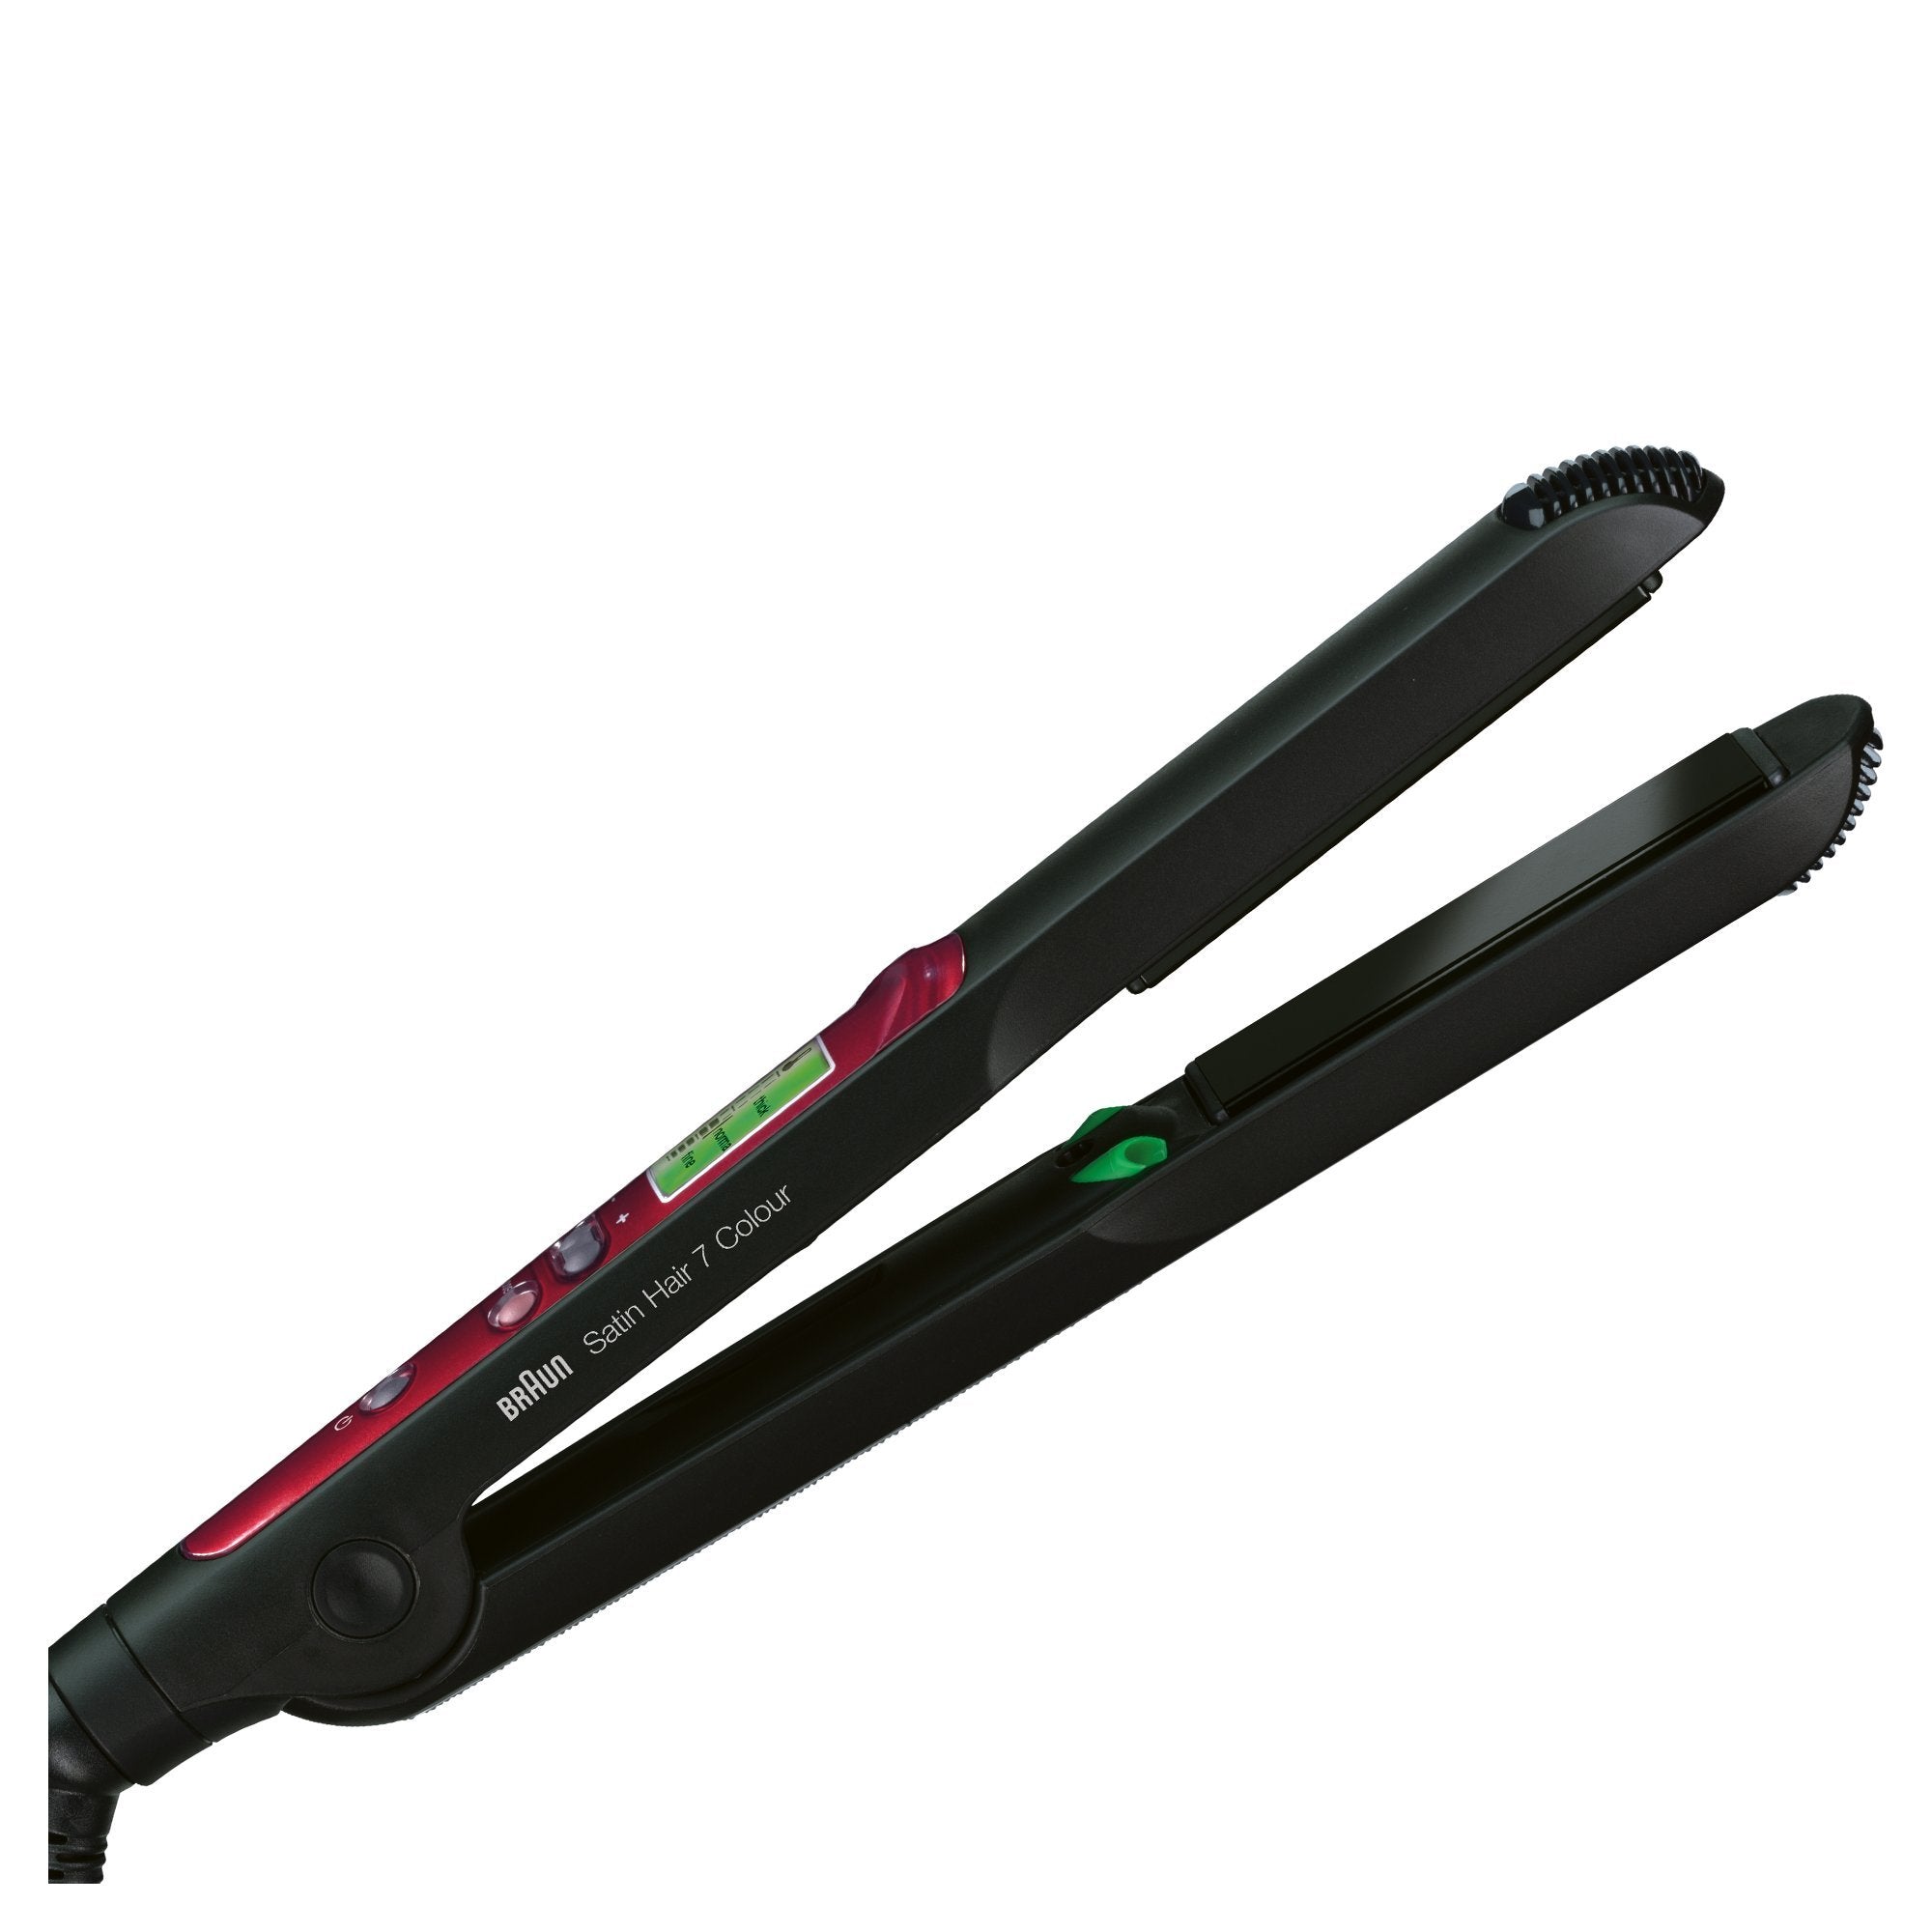 Braun Satin Hair 7 Hair Straightener | Best Personal Care Accessories in Bahrain | Hair Care and Styling Products | Halabh